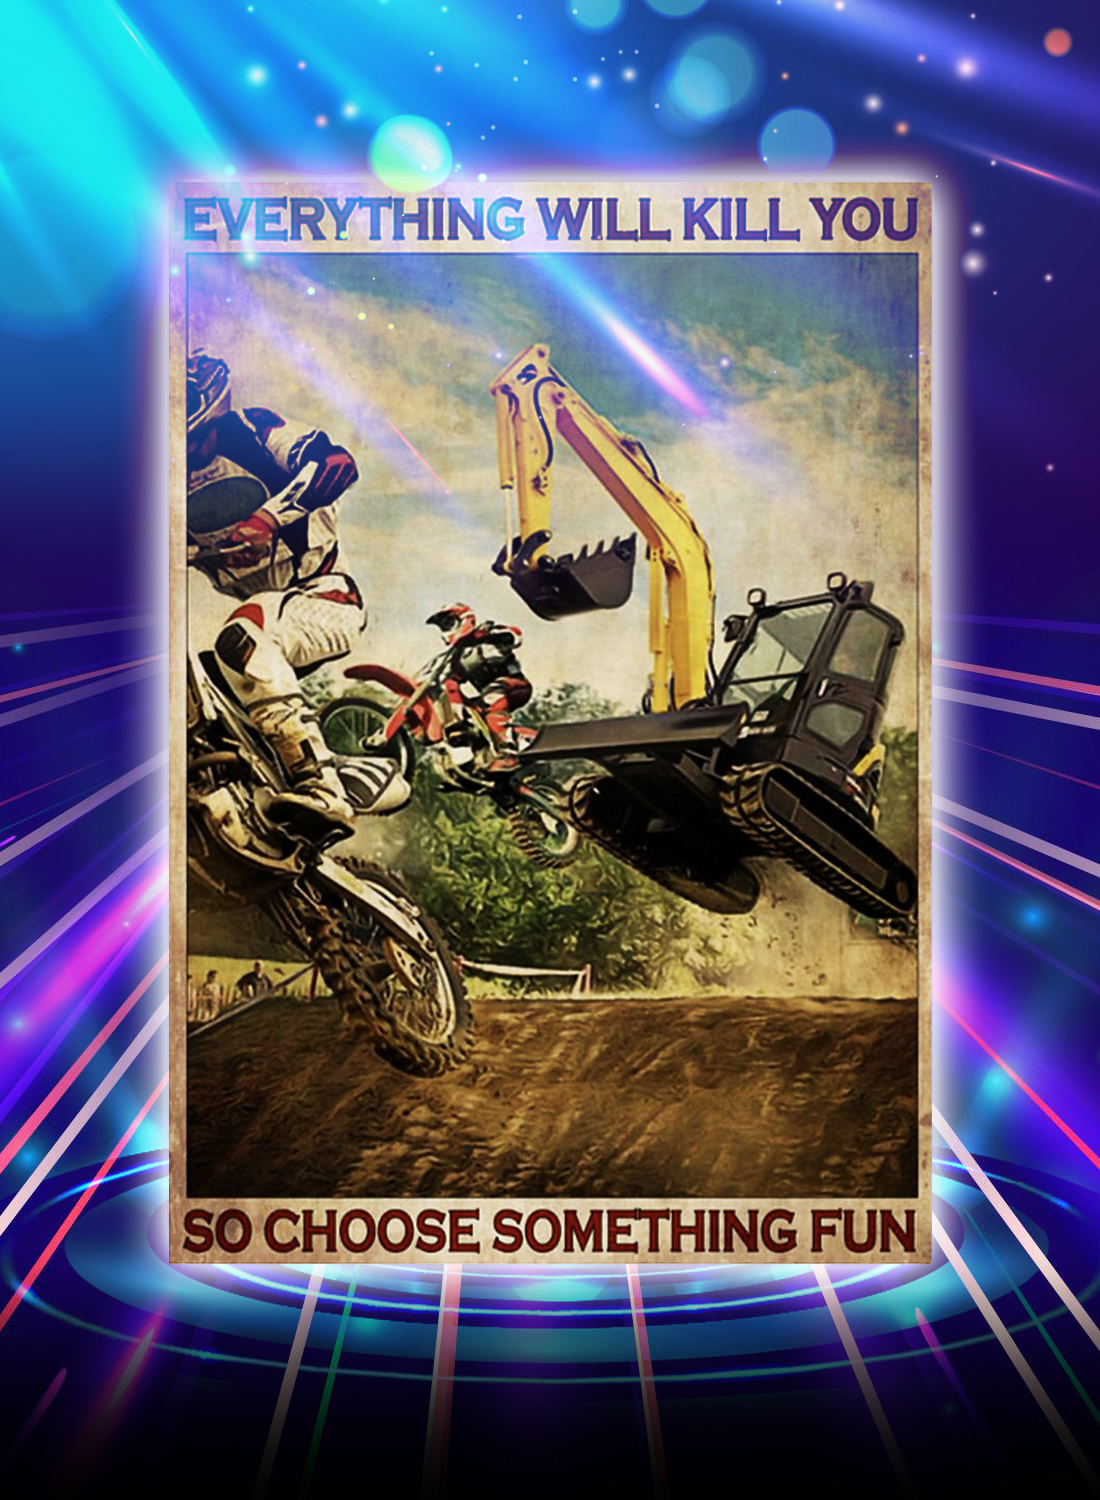 Motocross and excavator everything will kill you so choose something fun poster - A4